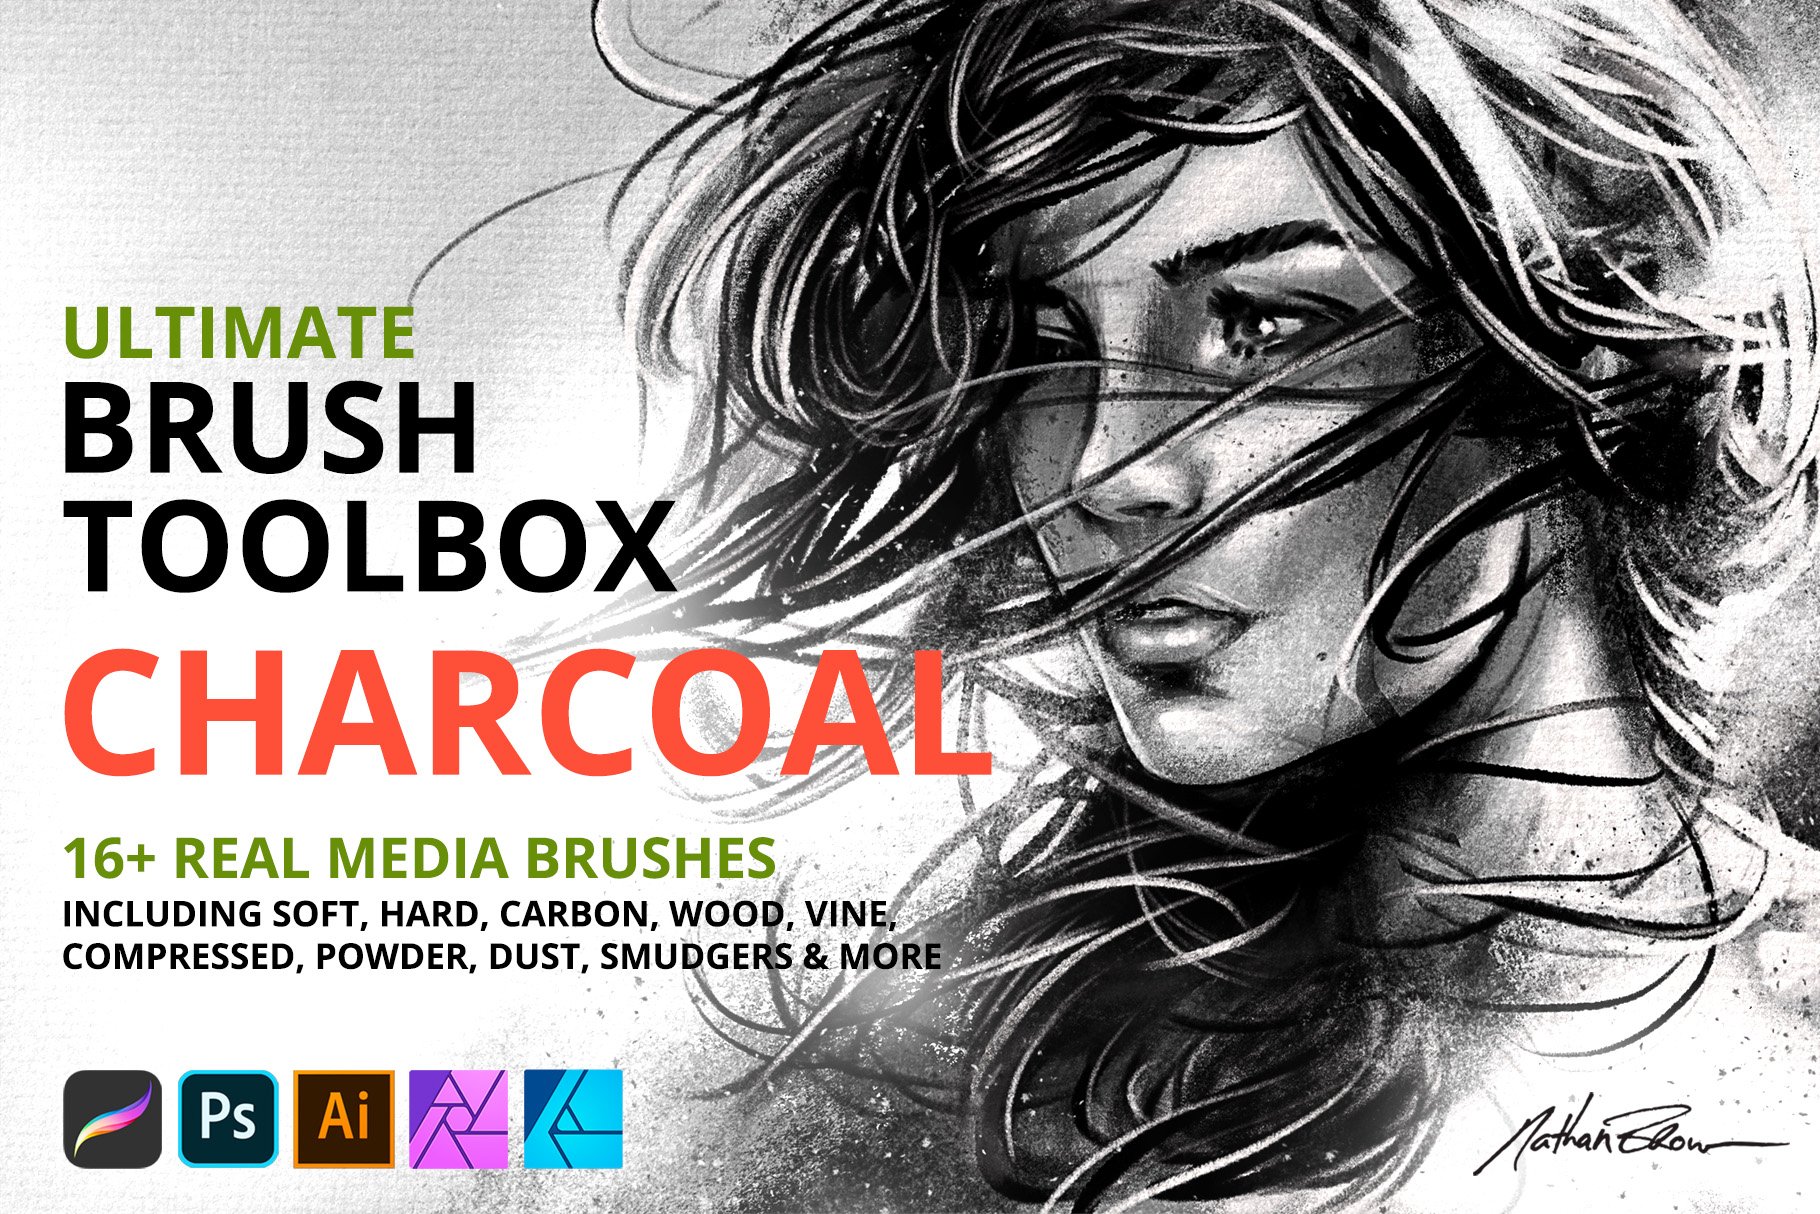 Ultimate Brush Toolbox - Charcoal Brushes